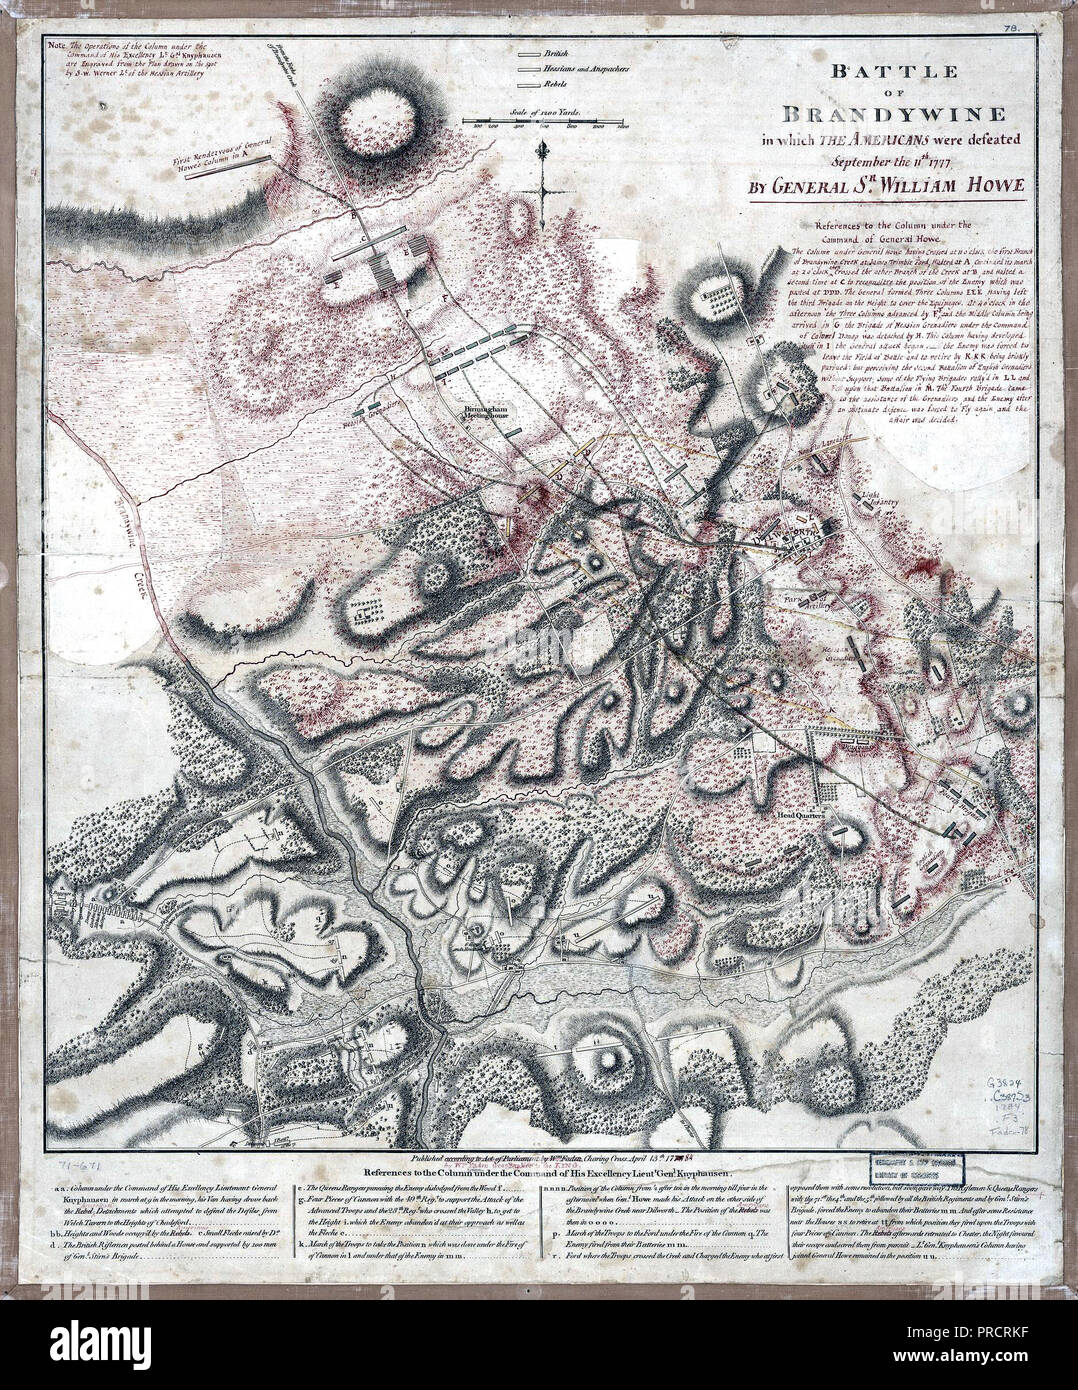 Vintage Maps / Antique Maps - Battle of Brandywine in which the Americans were defeated : September the 11th, 1777 by General Sr. William Howe Stock Photo